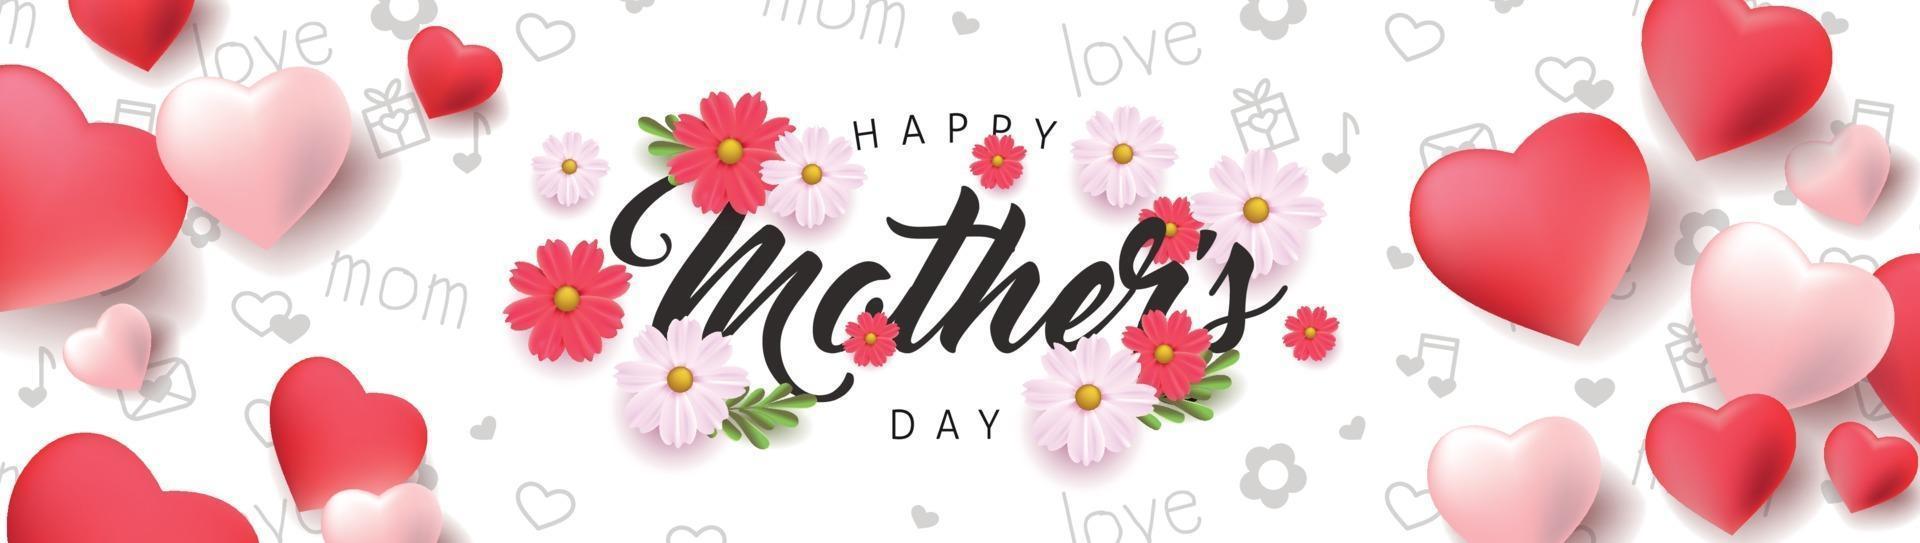 Mothers day banner background layout with Heart Shaped Balloons and flower.Greetings and presents for Mothers day in flat lay styling..Vector illustration template. vector